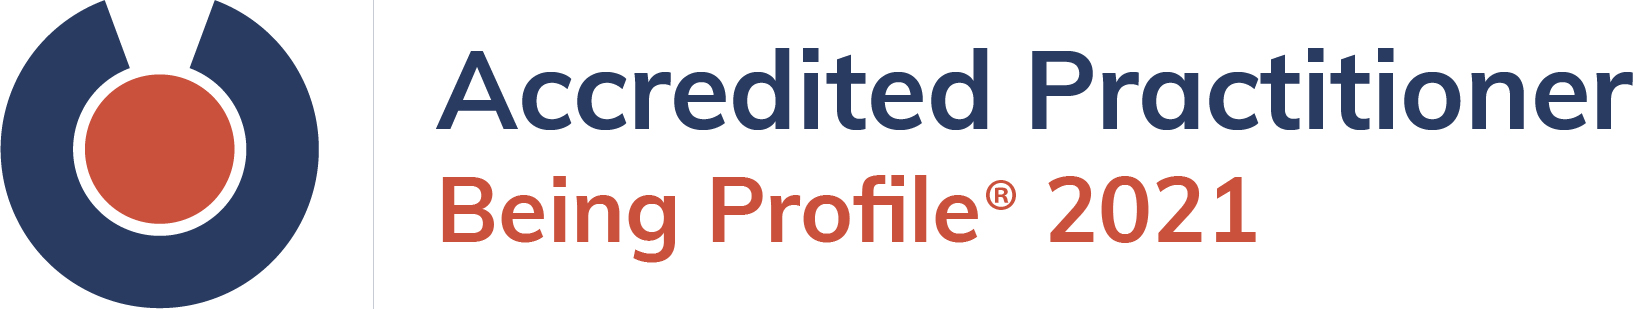 Being Profile Accredited Practitioner